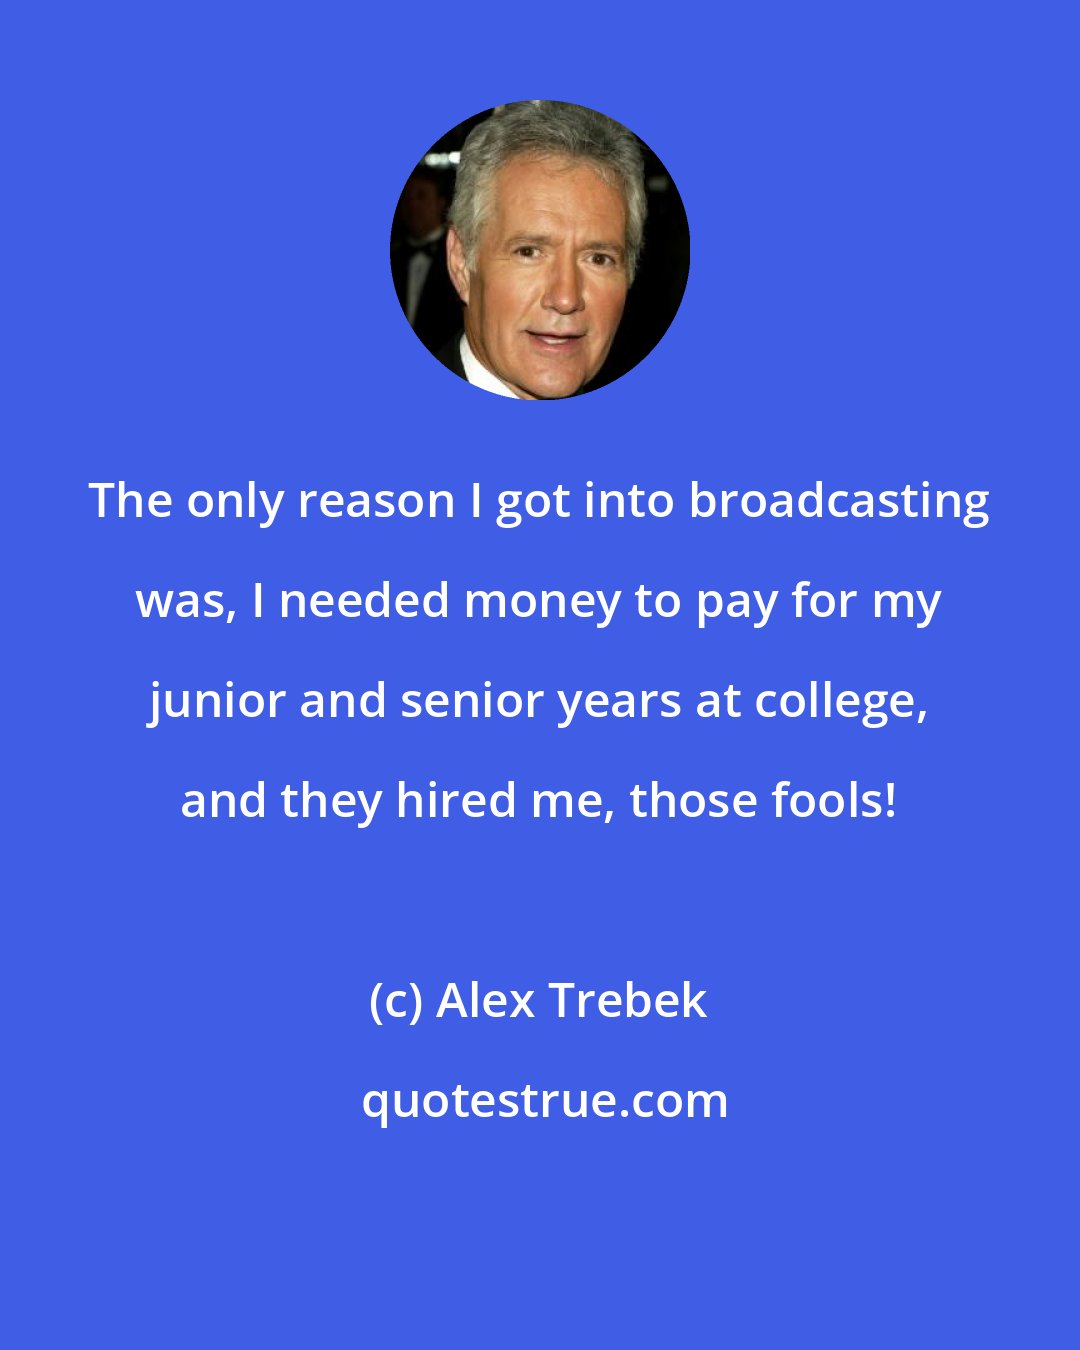 Alex Trebek: The only reason I got into broadcasting was, I needed money to pay for my junior and senior years at college, and they hired me, those fools!